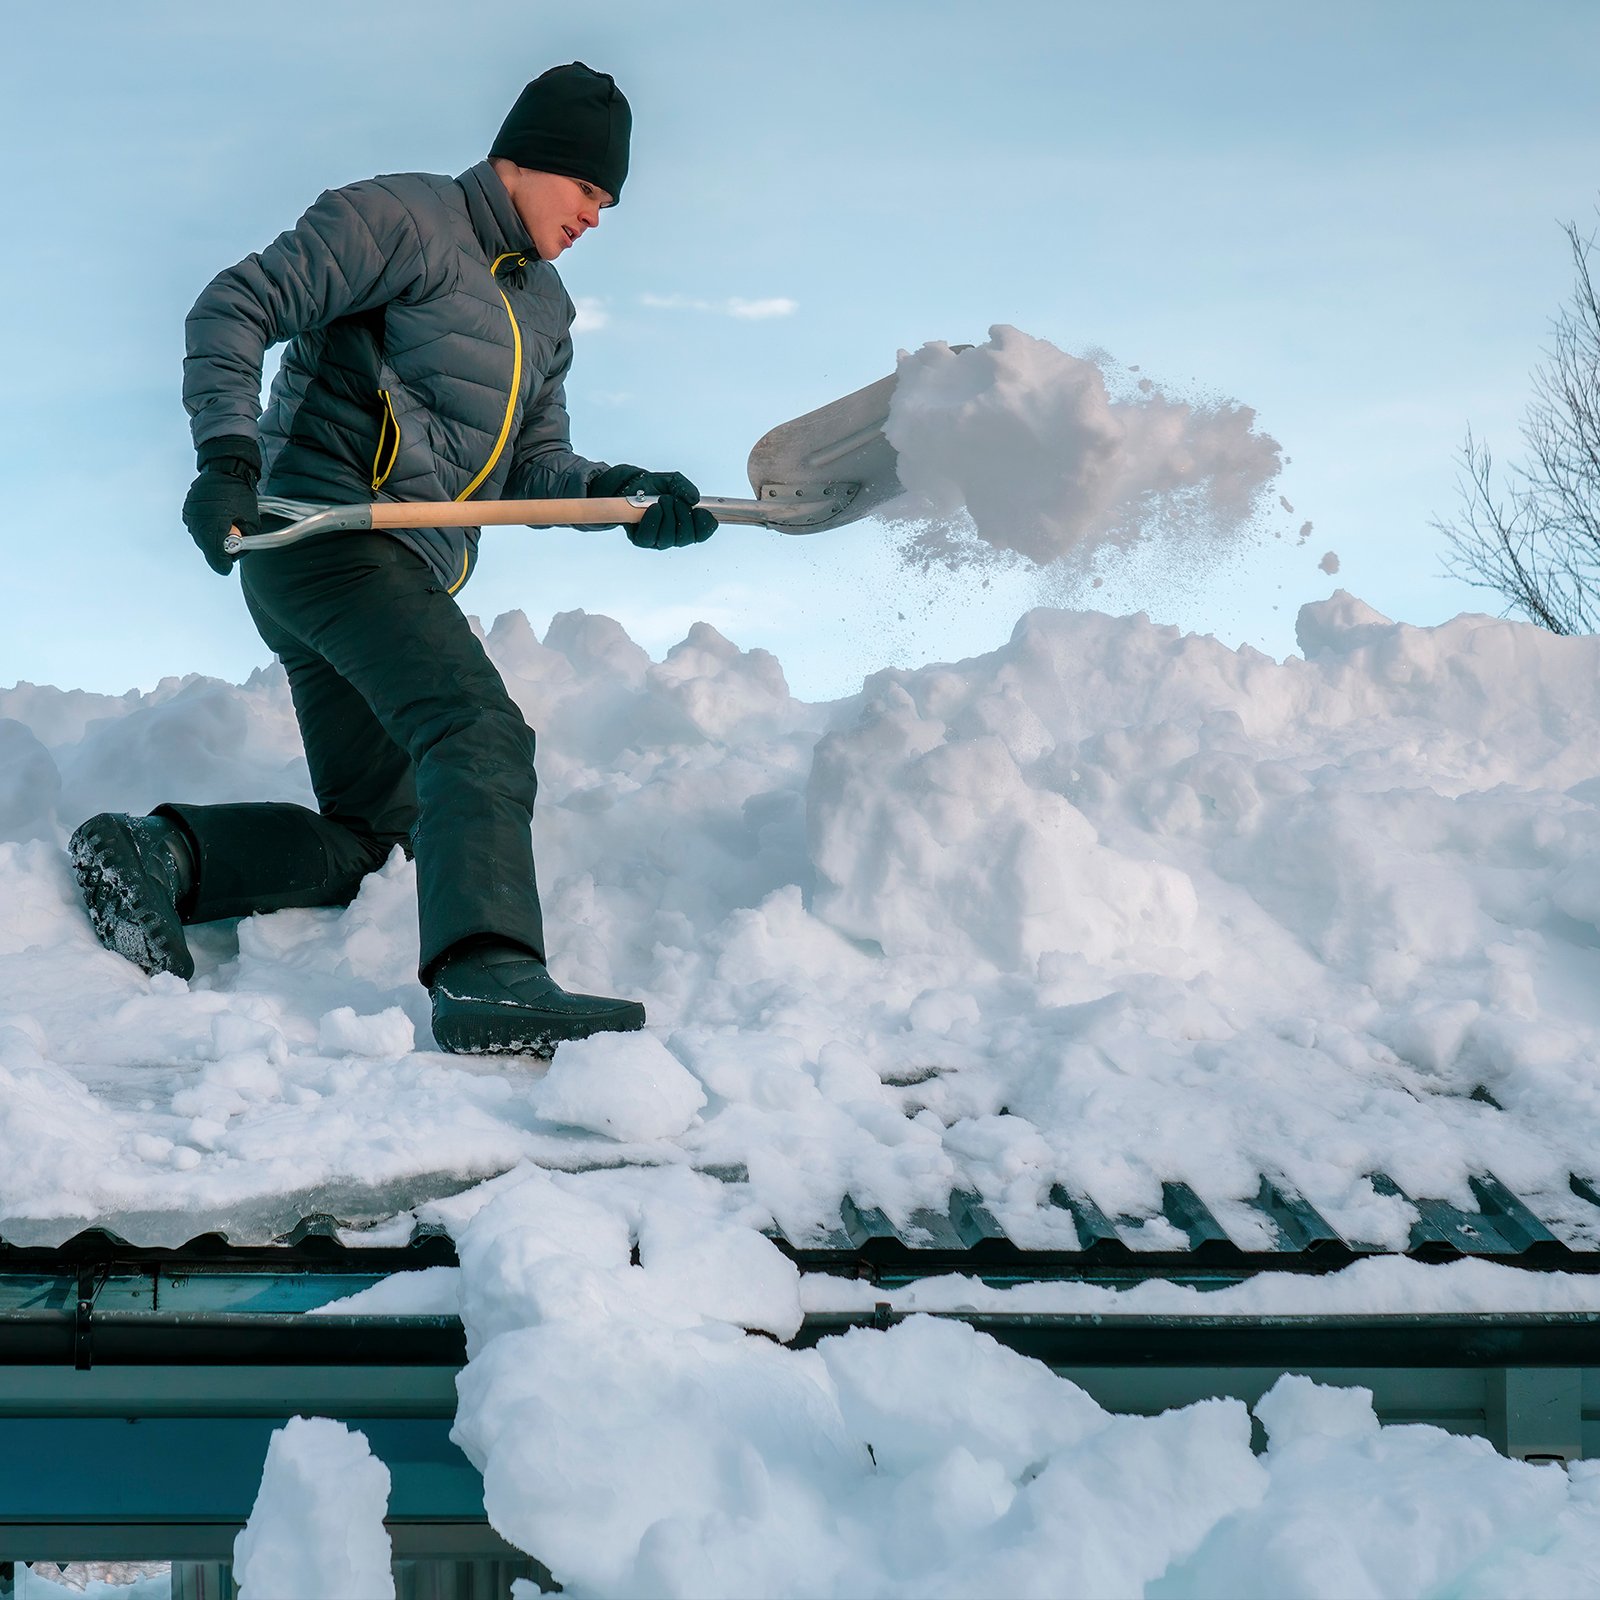 A lot of snow can become a danger for light roofs